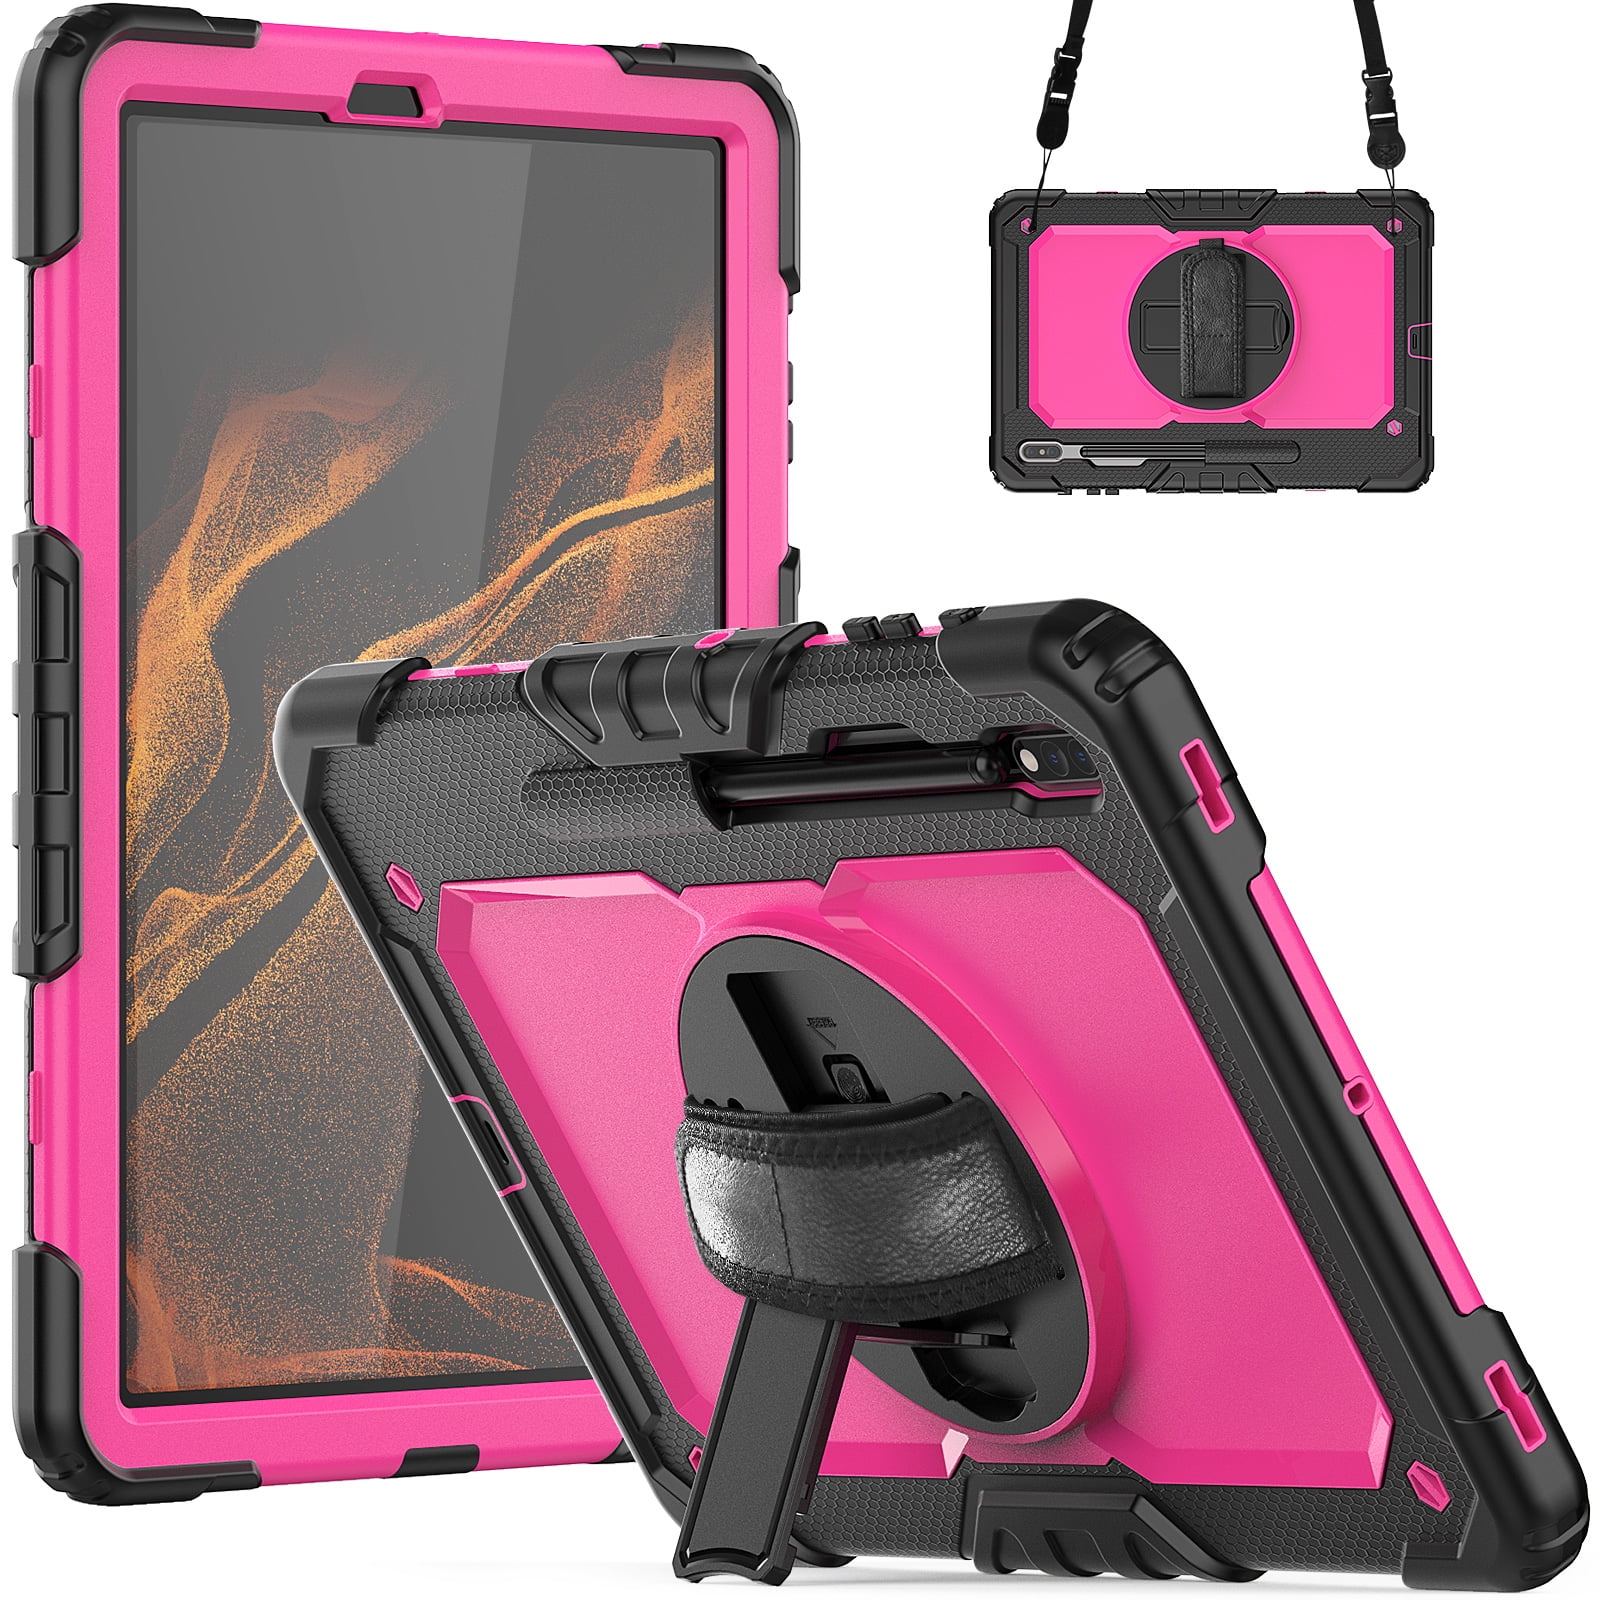 (2021) (2022) Hand Shoulder 12.4\'\' Swivel Screen 5G Degree Case With Allytech Kickstand Heavy FE & Plus 12.4 Protector&360 Galaxy / for Plus/S8+ Strap Samsung Case / (2020) S7 Tab Duty inch S8 S7